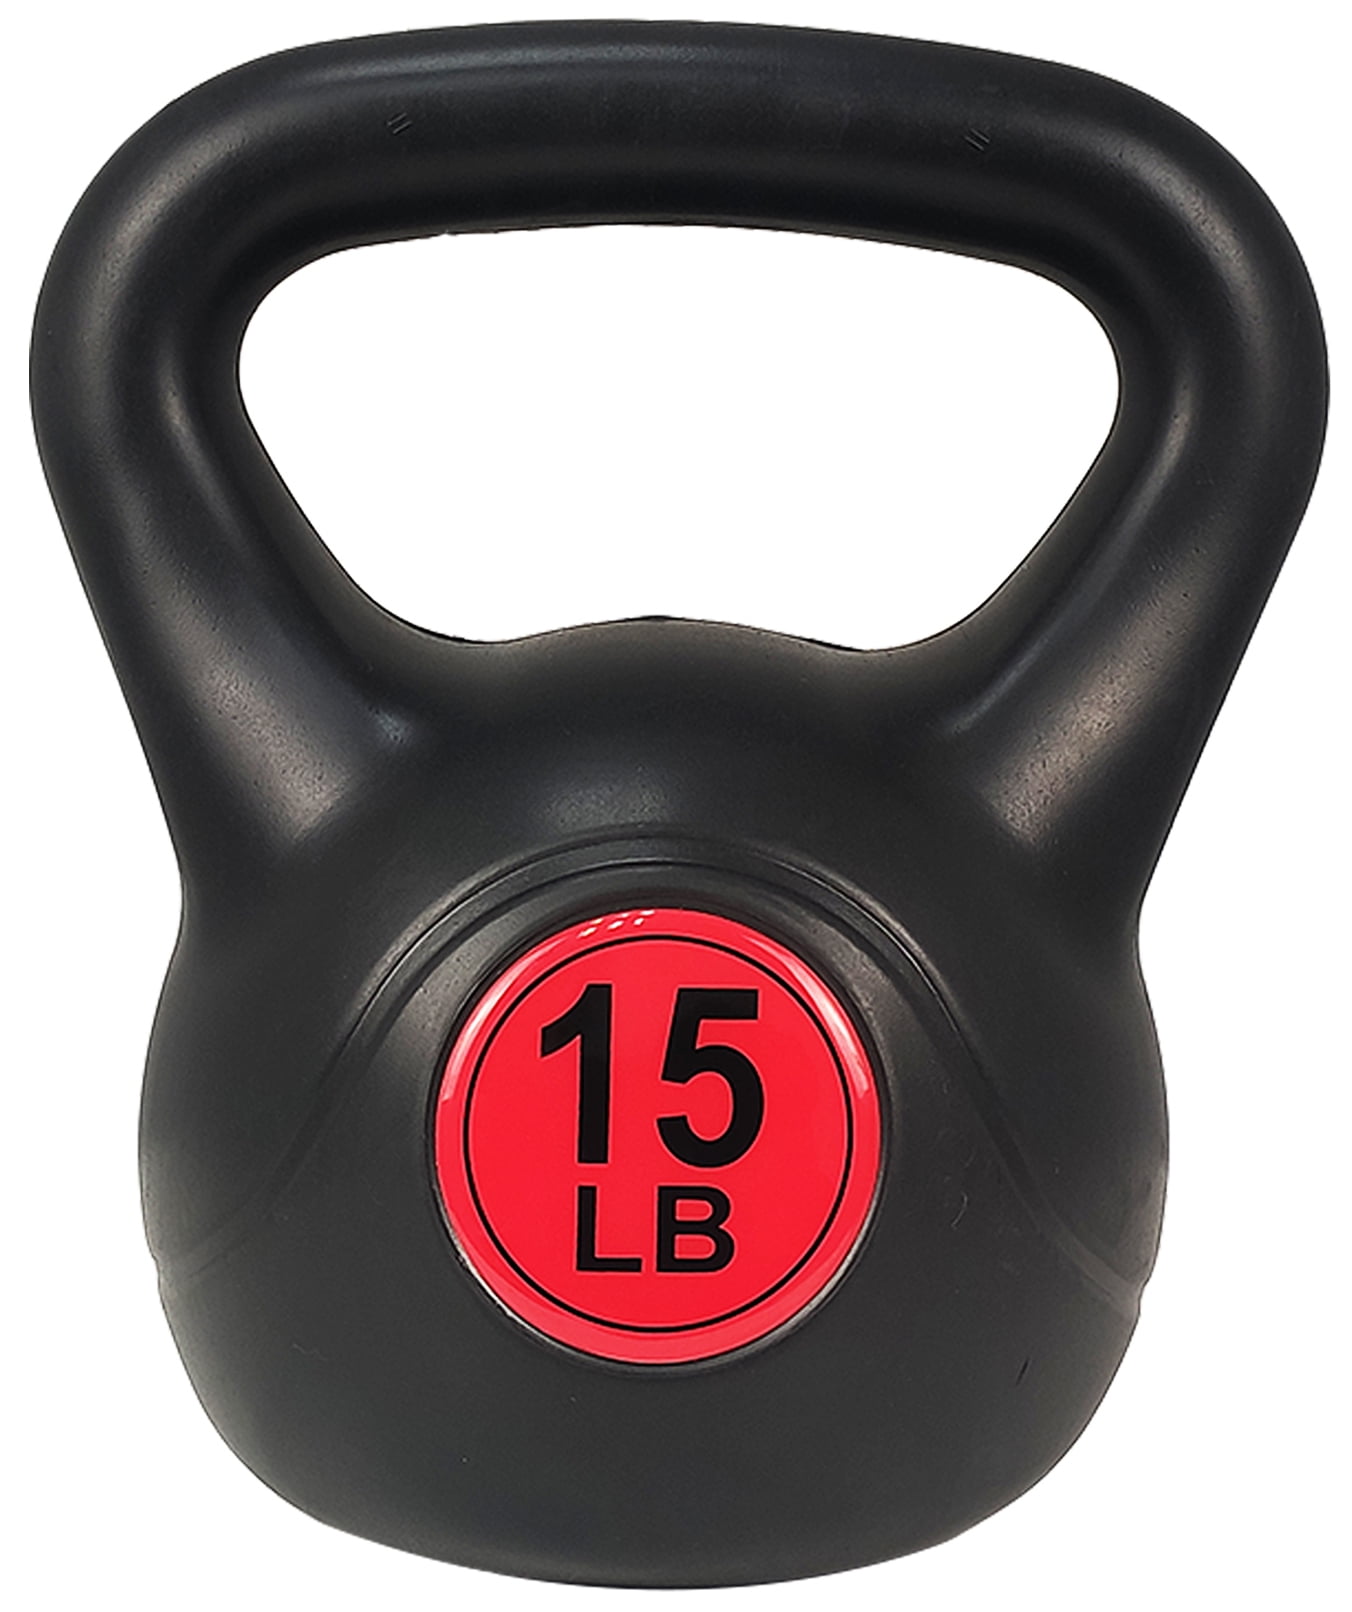 BalanceFrom Wide Grip 3-Piece Kettlebell Exercise Fitness Weight Set, Include 10 Lbs., 15 Lbs., 20 Lbs. - 45lbs